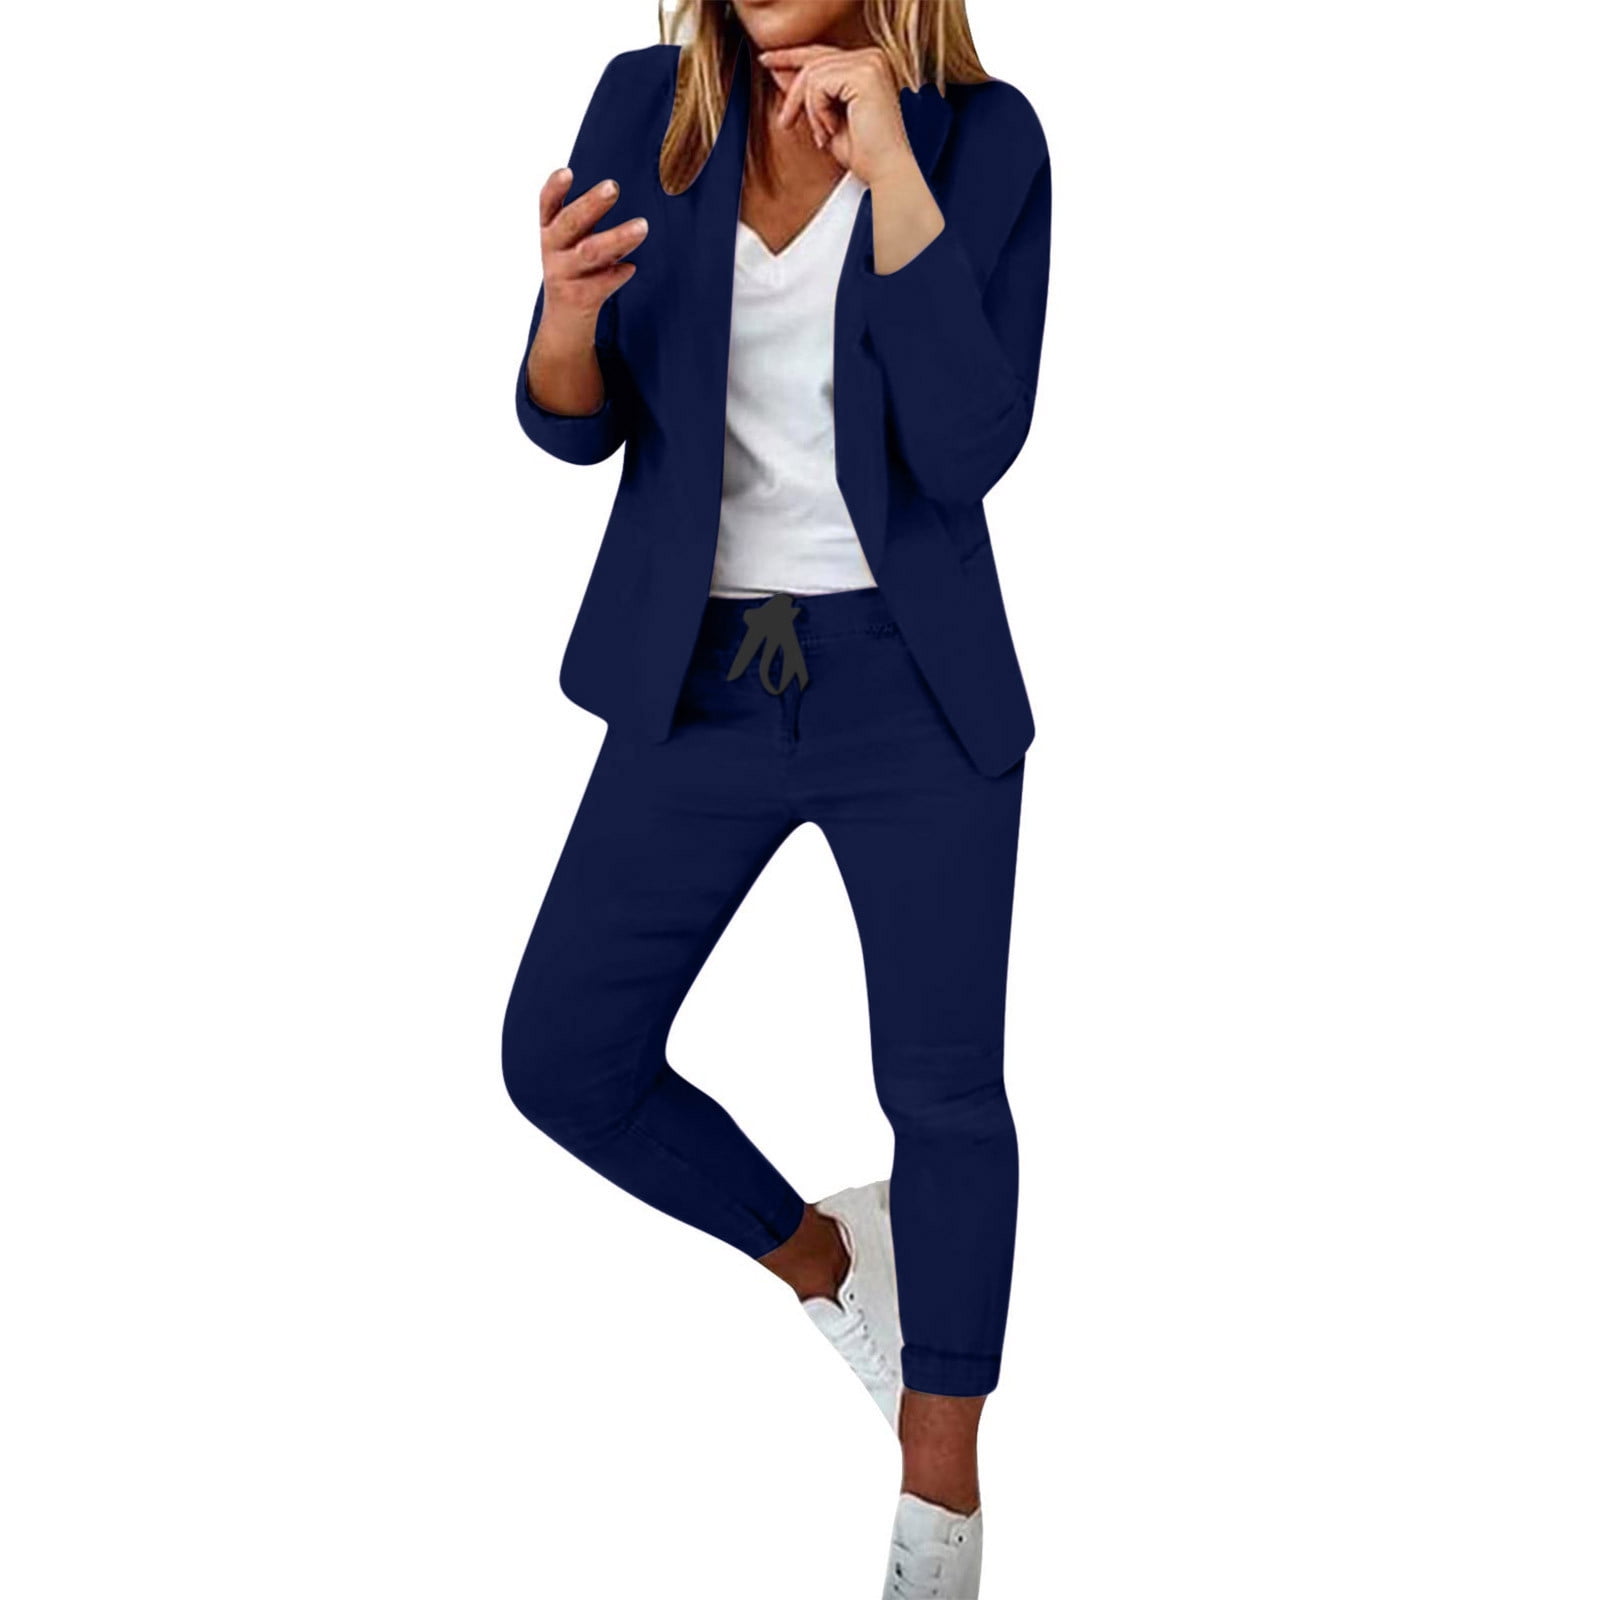 REORIAFEE Casual Outfits for Women Date Night Outfit Women's Long Sleeve Suit  Pants Casual Elegant Business Suit Navy M 